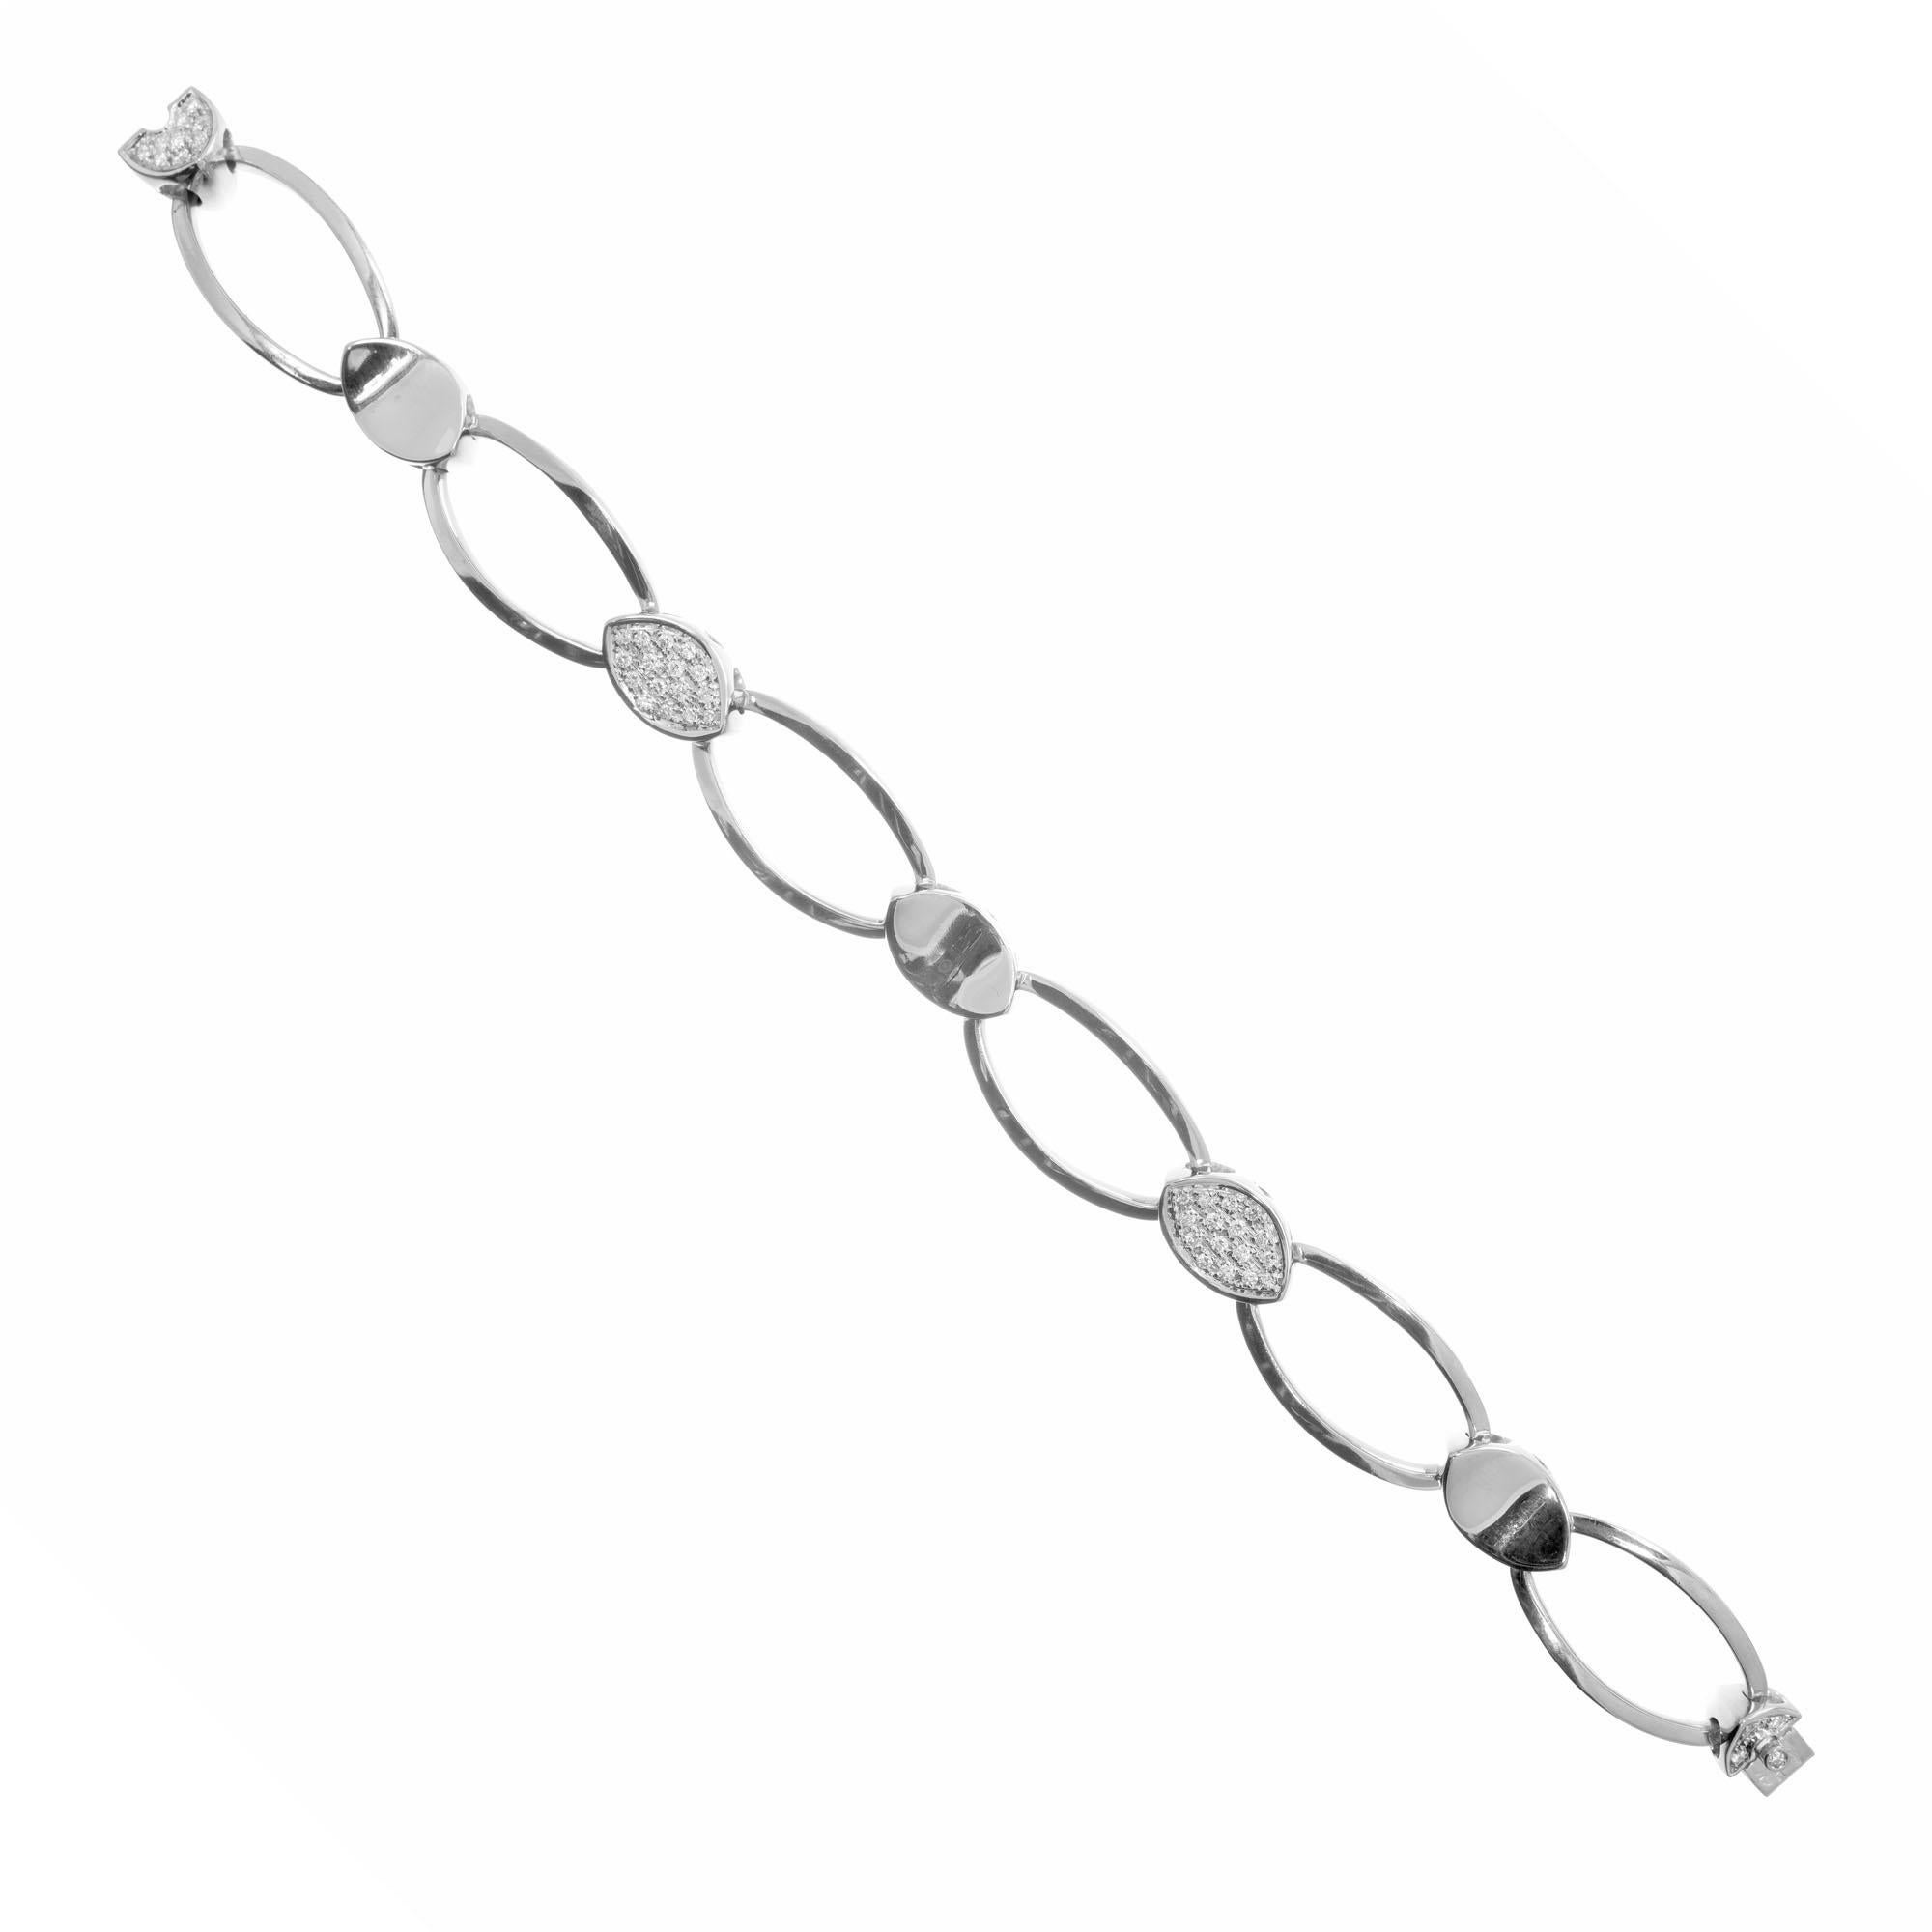 Open oval link bracelet with marquise shaped connecting links with pave set full cut diamonds in 18k white gold. 7 inches.

46 round brilliant cut diamonds, H VS approx. .65cts
18k white gold
Stamped: 750
29.5 grams
Bracelet: 7 Inches
Width: